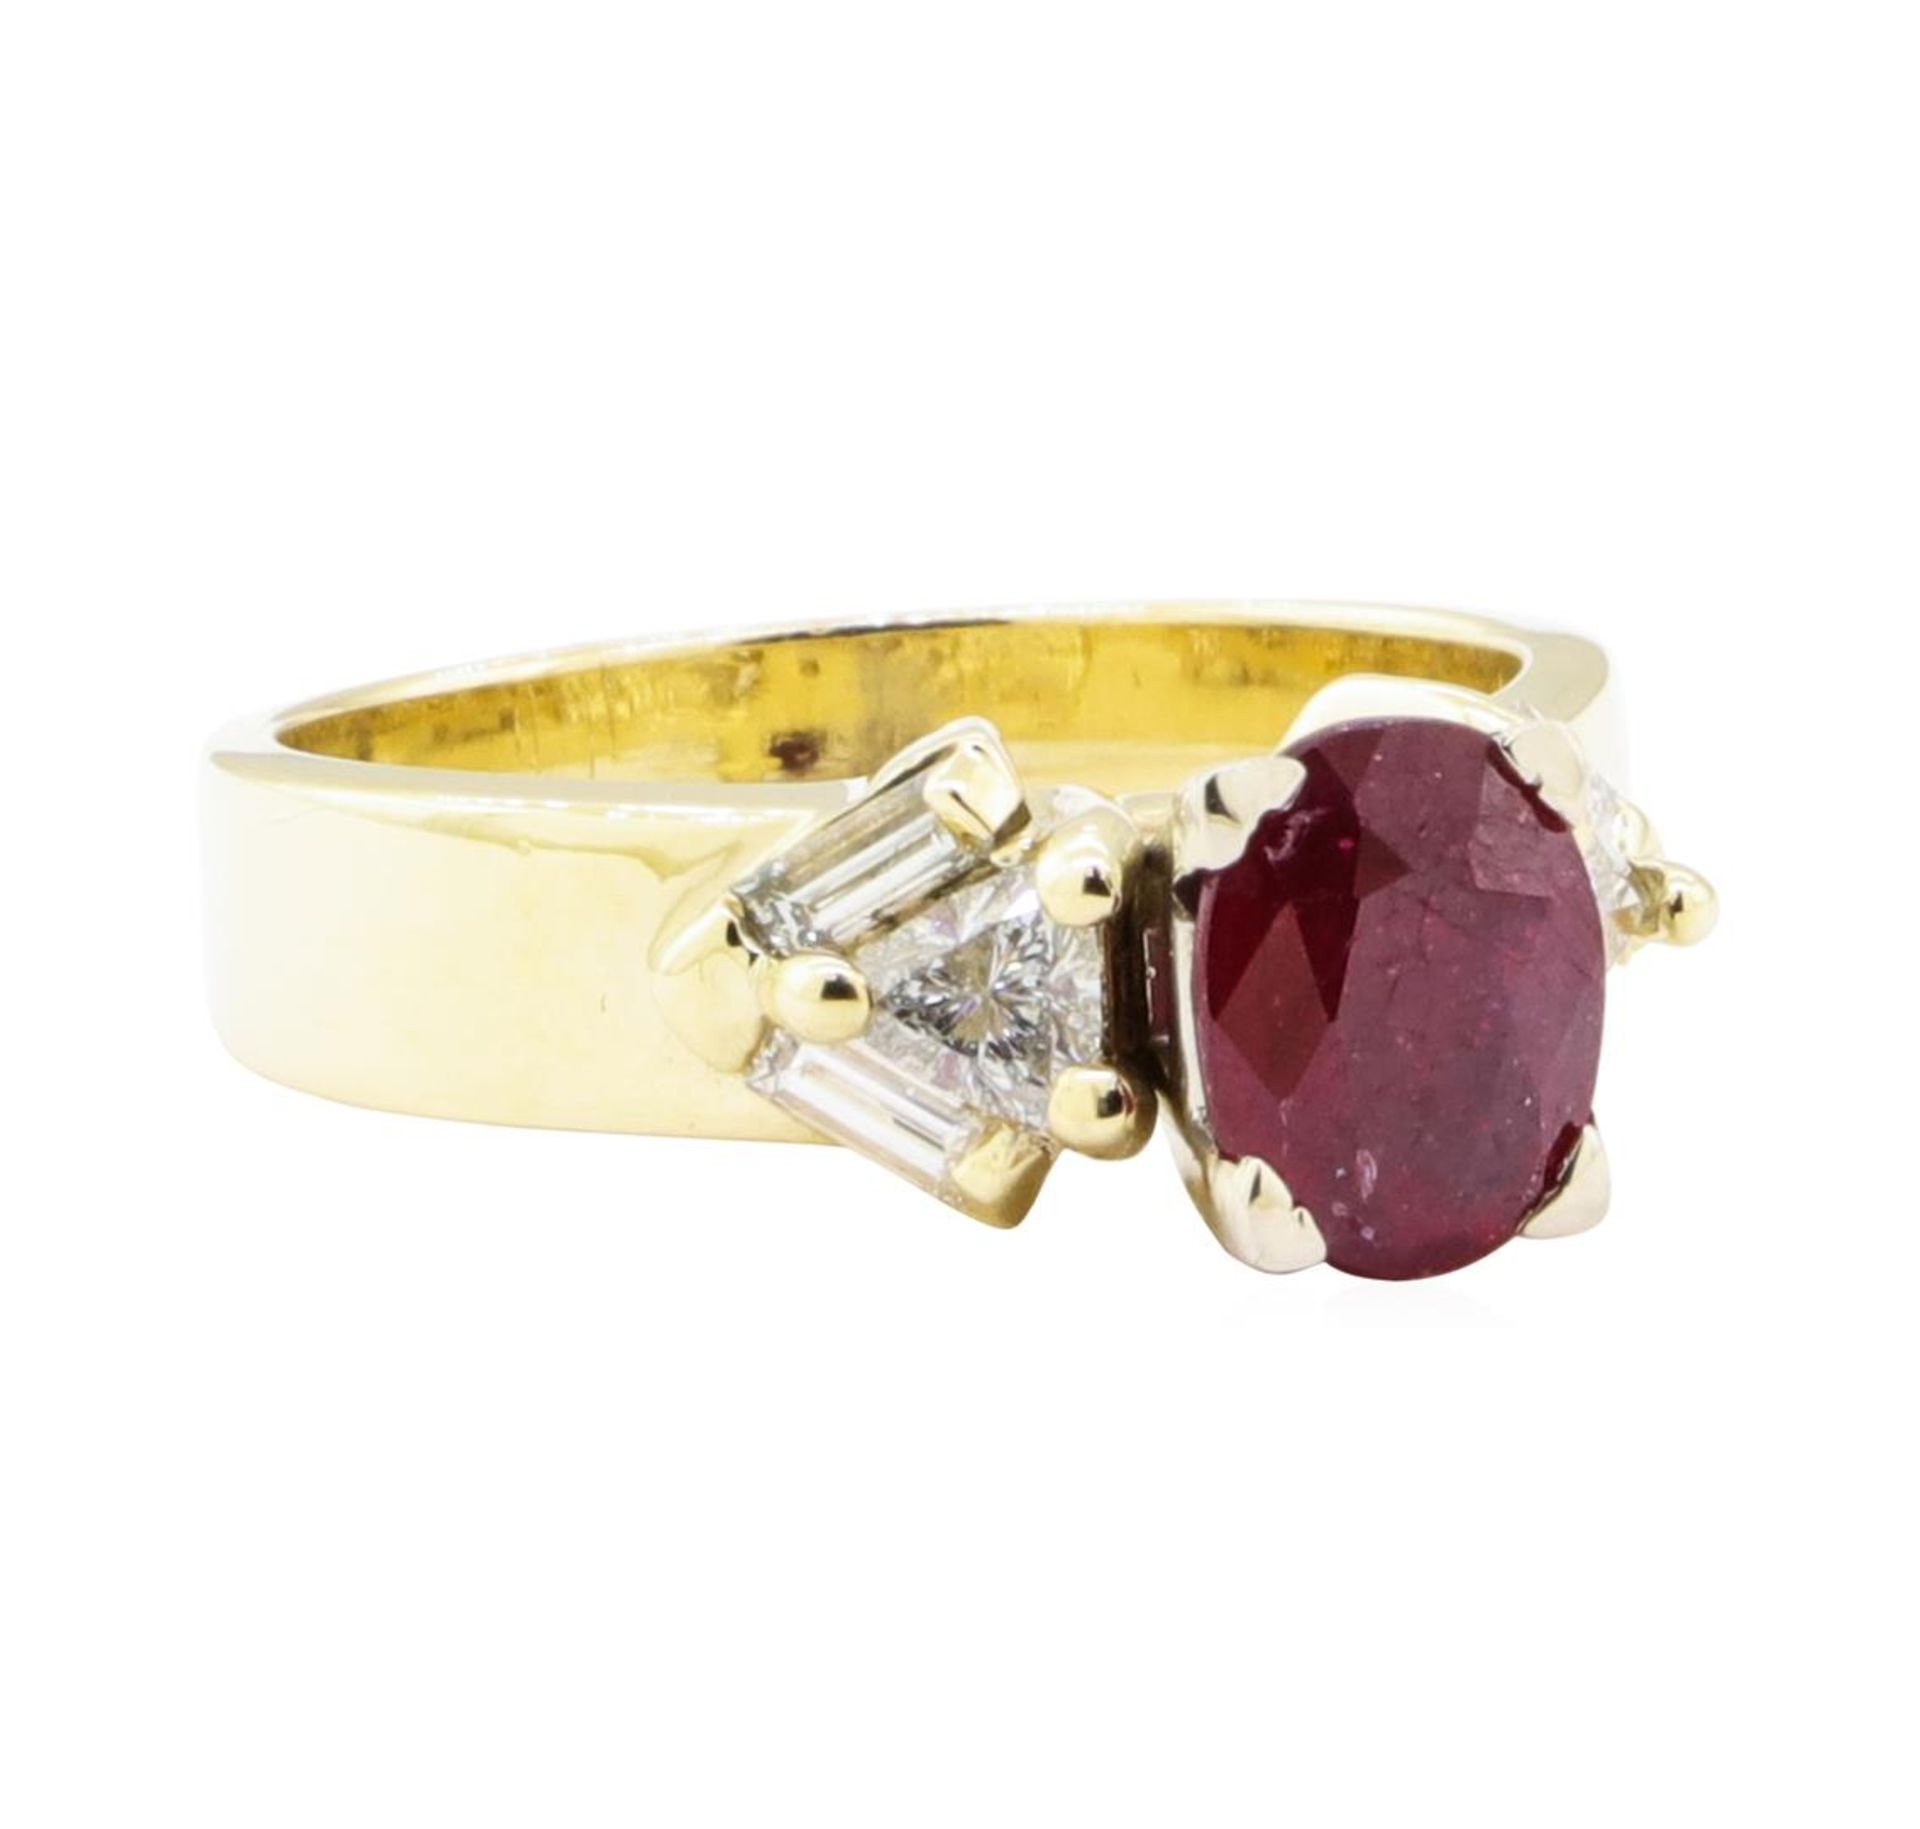 1.91ctw Ruby and Diamond Ring - 14KT Yellow Gold